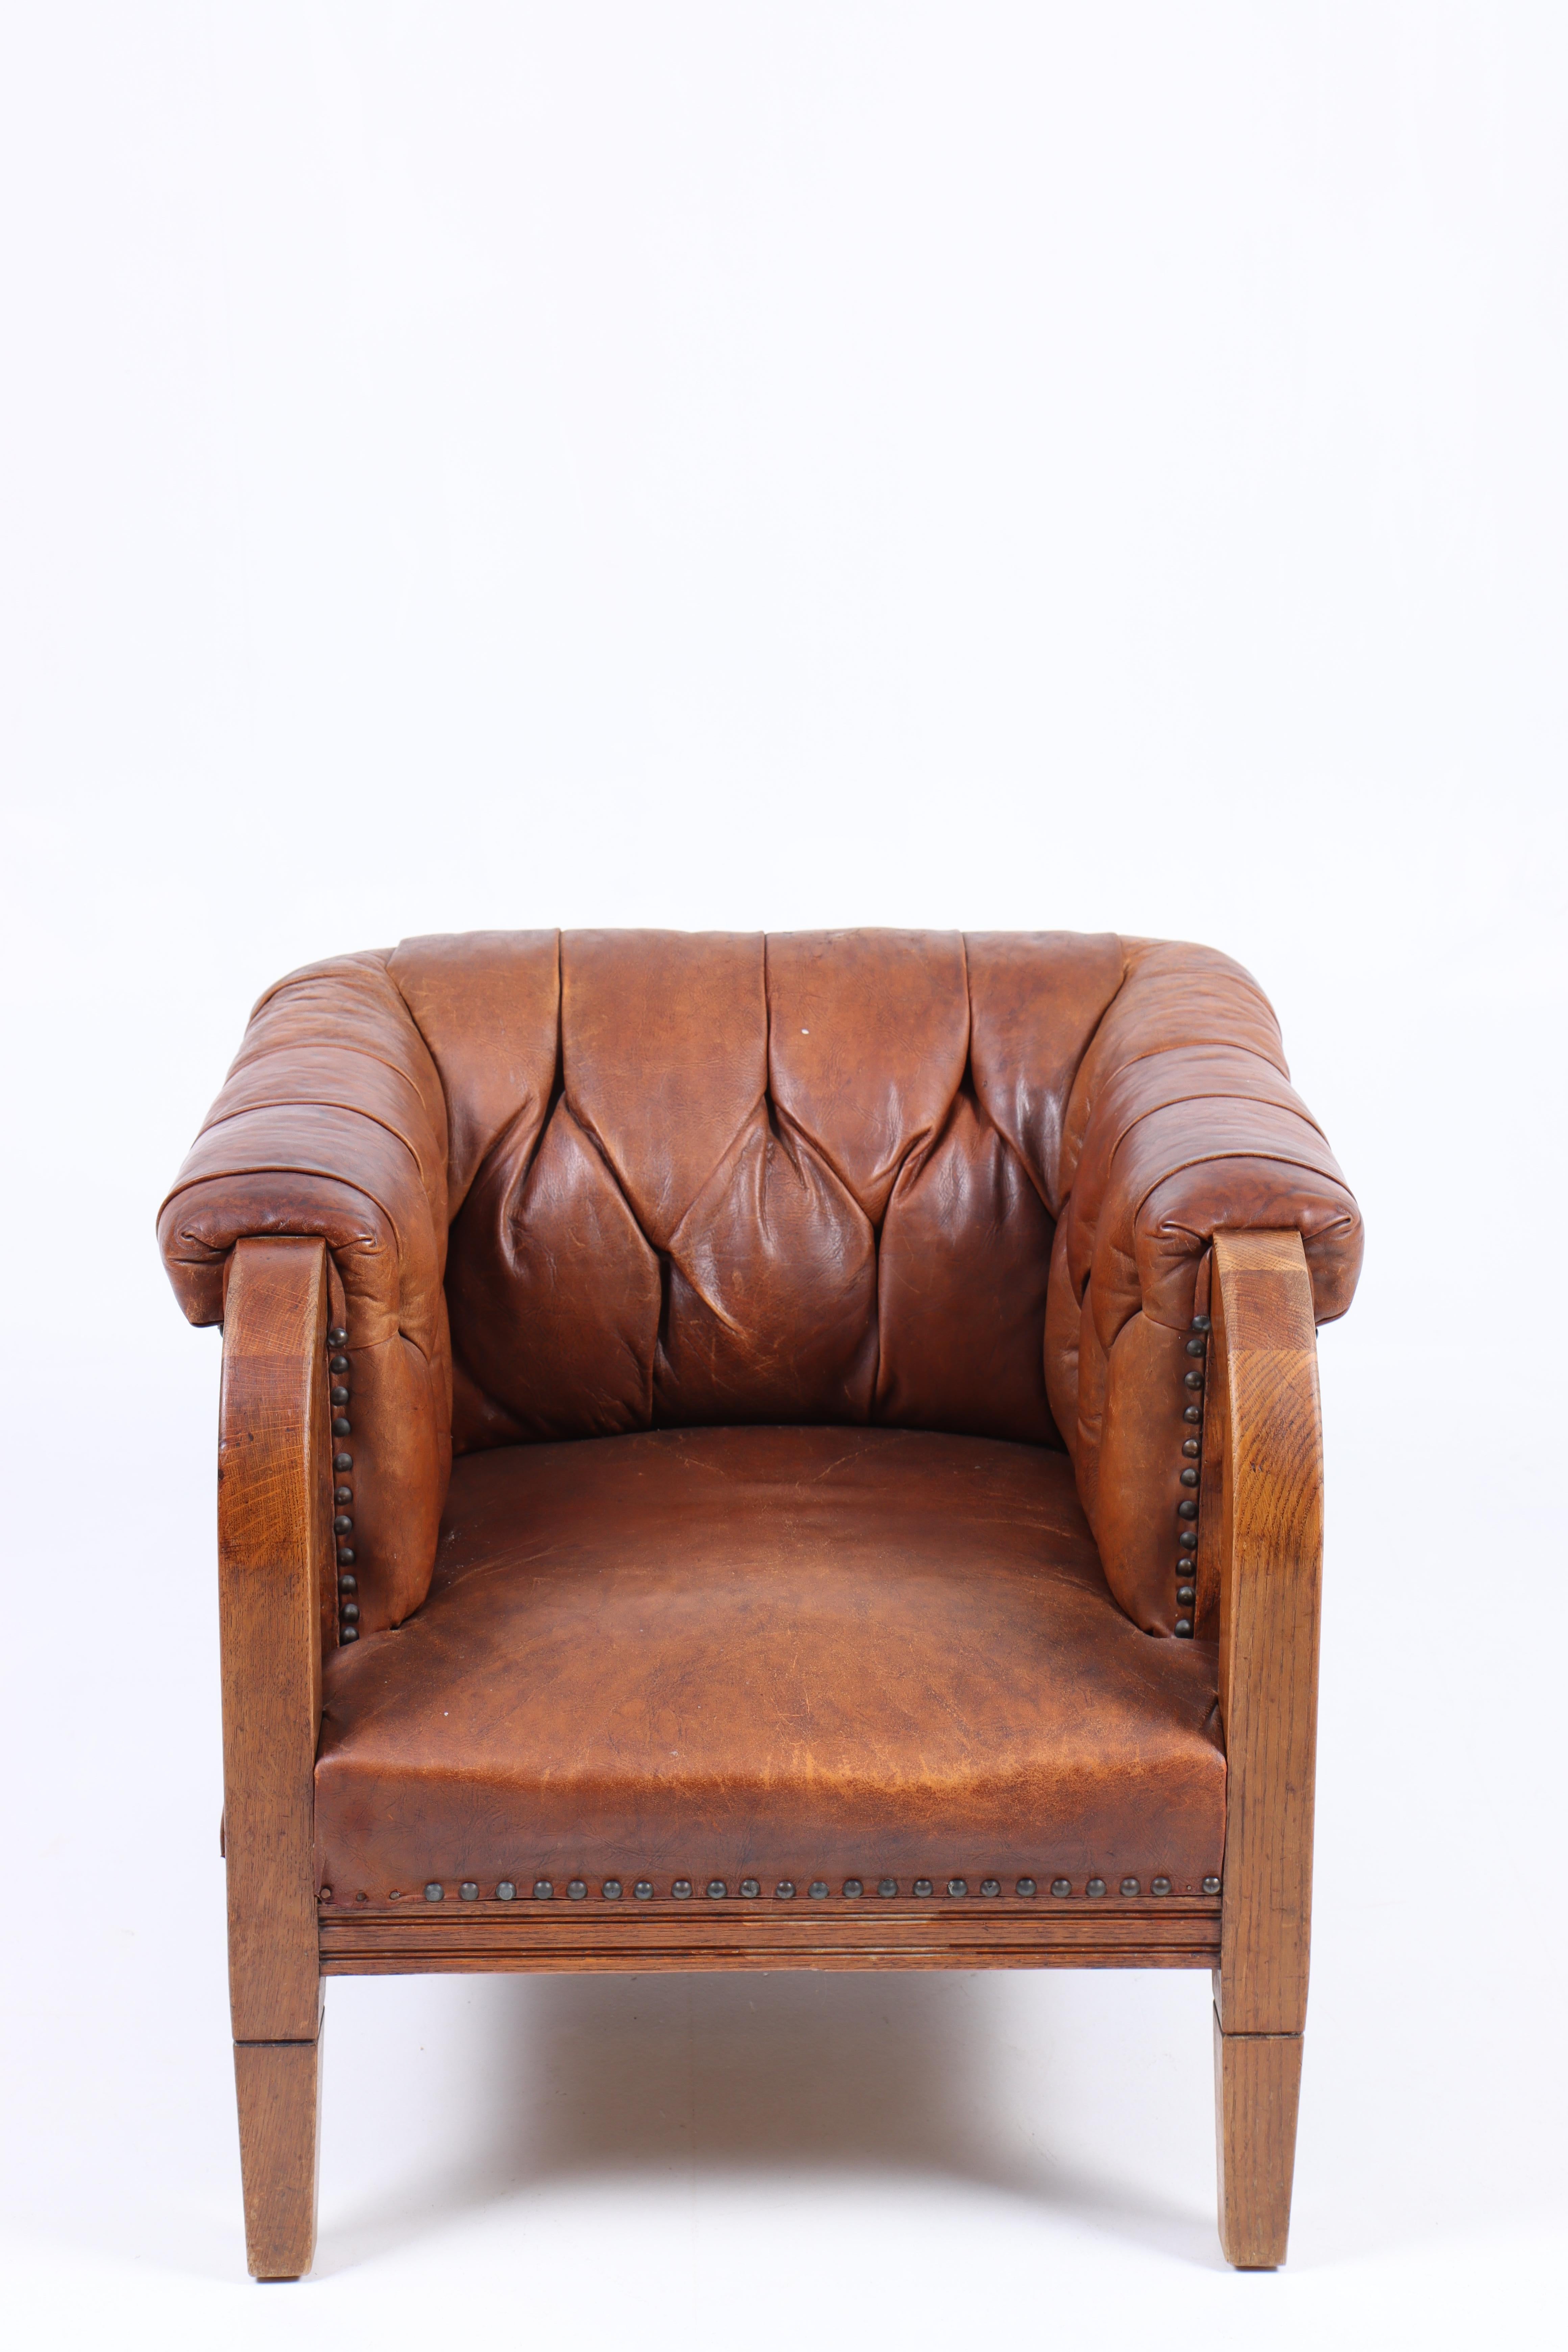 Lounge chair in leather designed and made Denmark. Great condition.